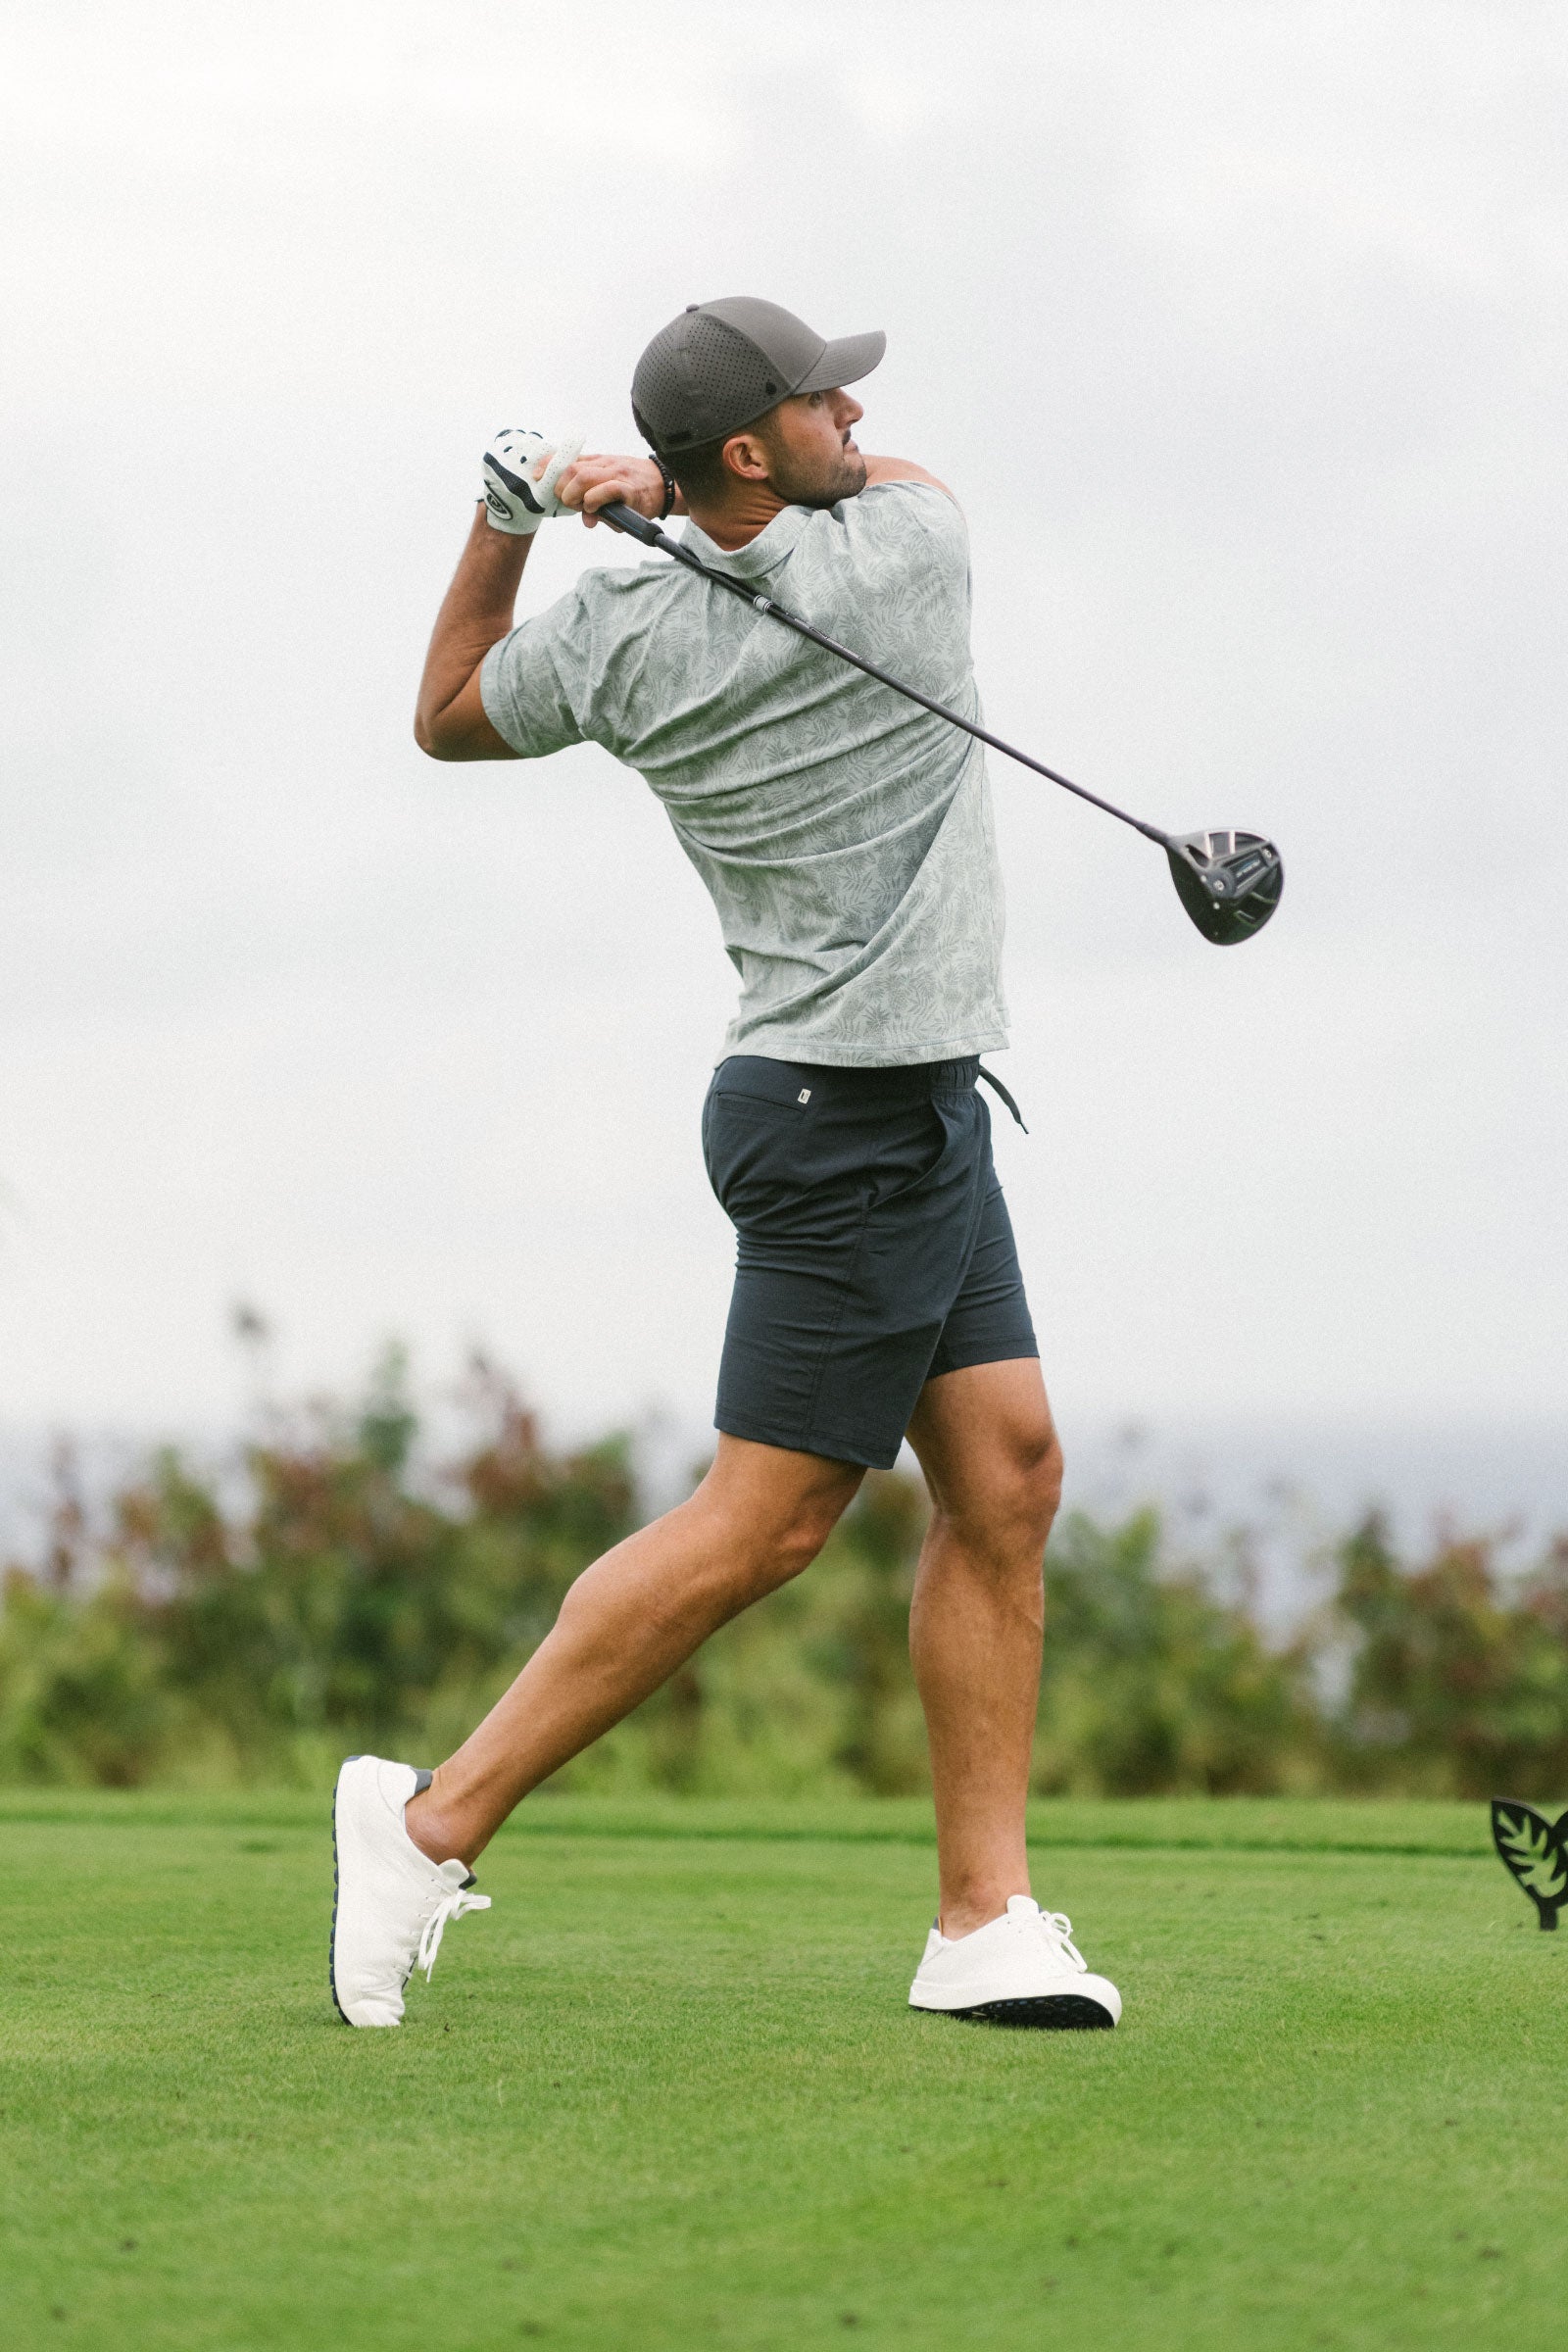 OluKai - The Most Comfortable Shoes for Golf